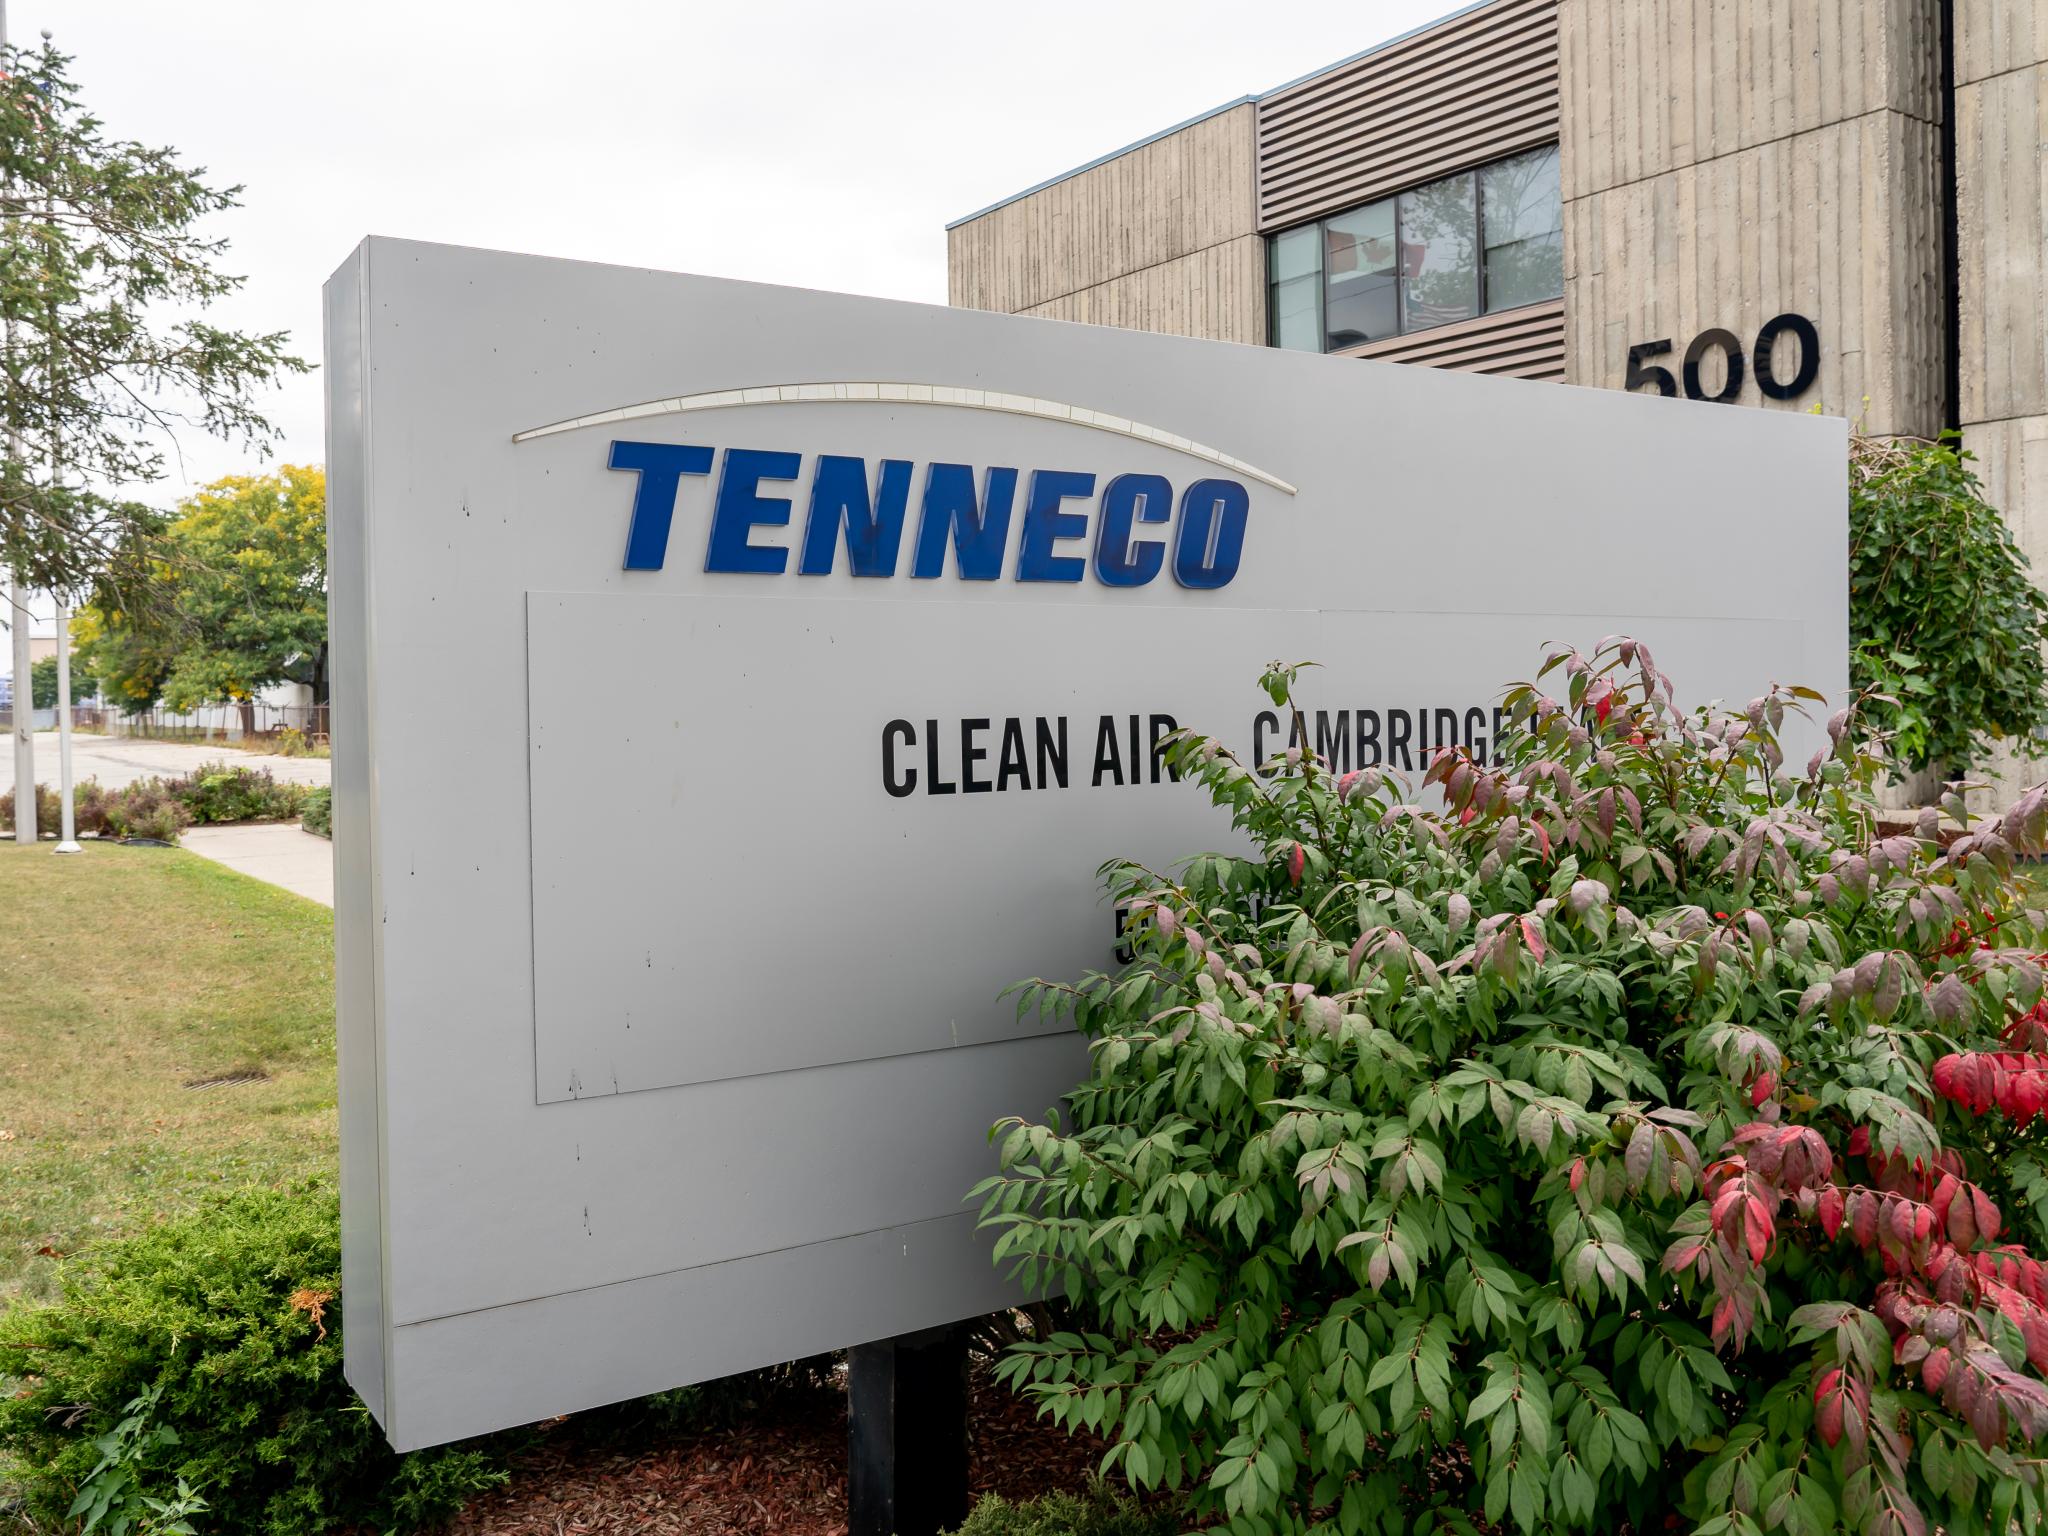  tennecos-ten-q2-loss-wider-than-expected-sales-beat 